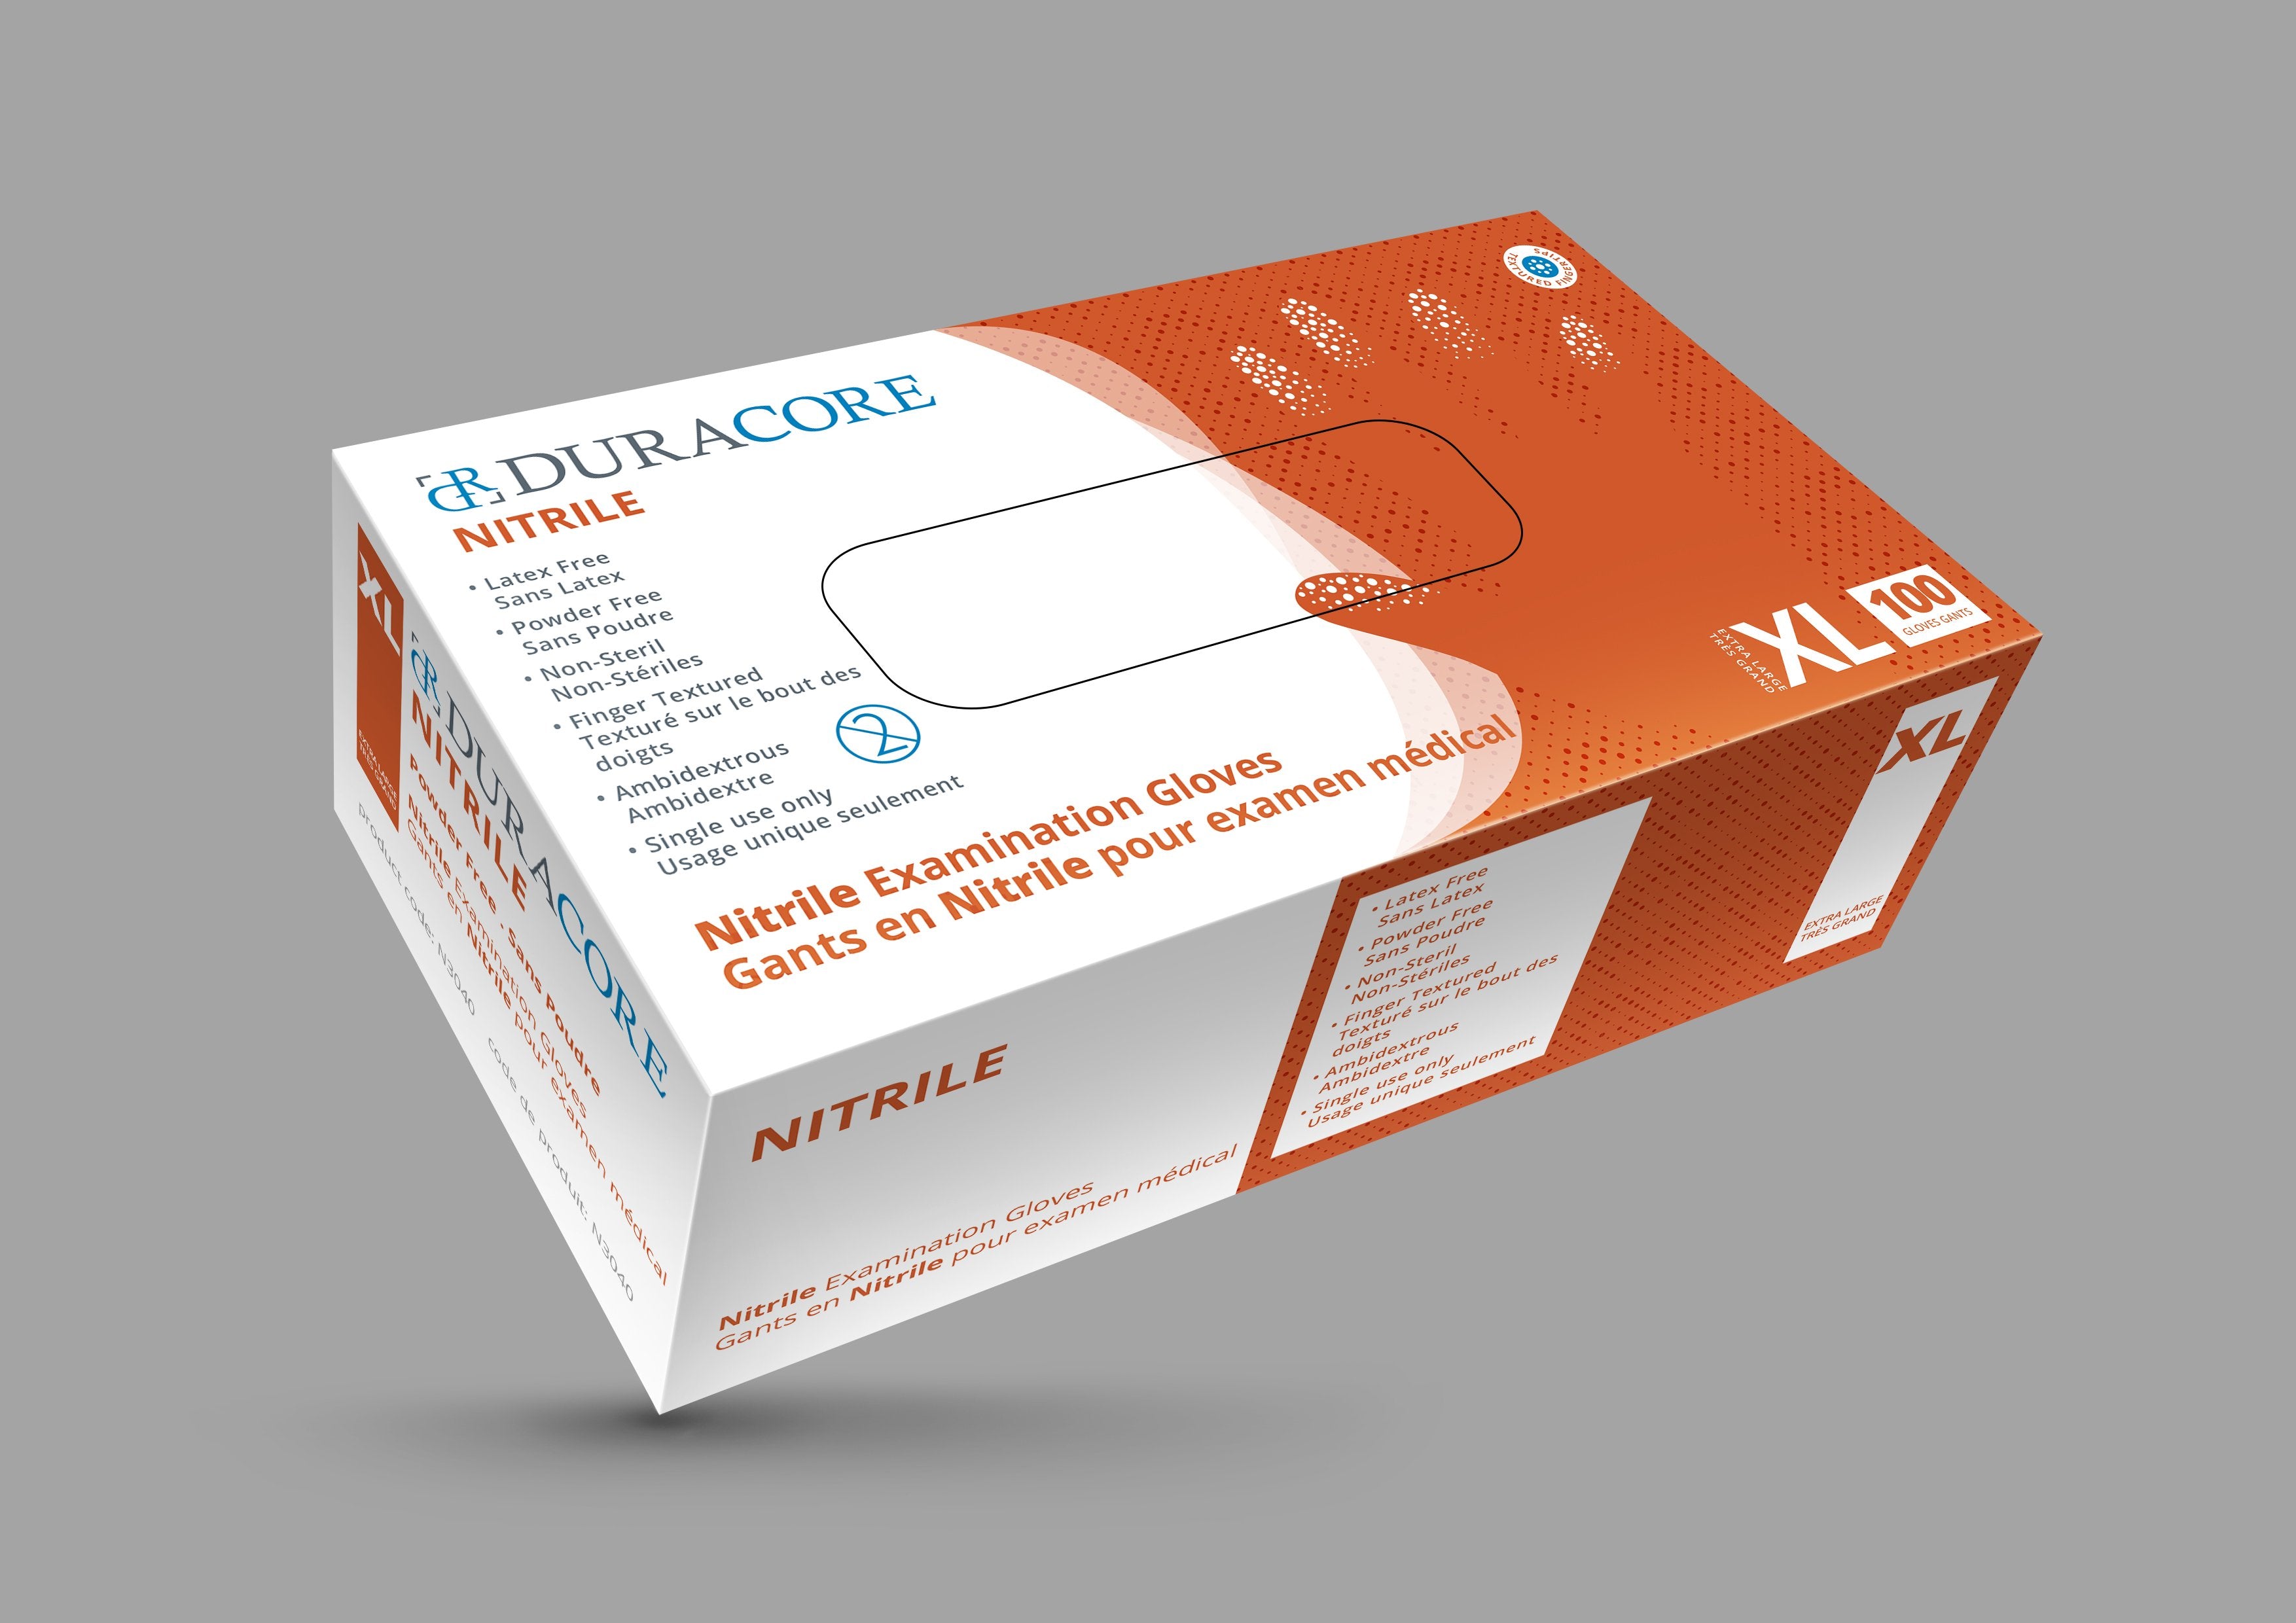 DC N3540 (CS/10) BX/100 DURACORE NITRILE EXAMINATION GLOVES, 3 MIL, POWDER FREE, X-LARGE  (ALL SALES FINAL /NON RETURNABLE)  